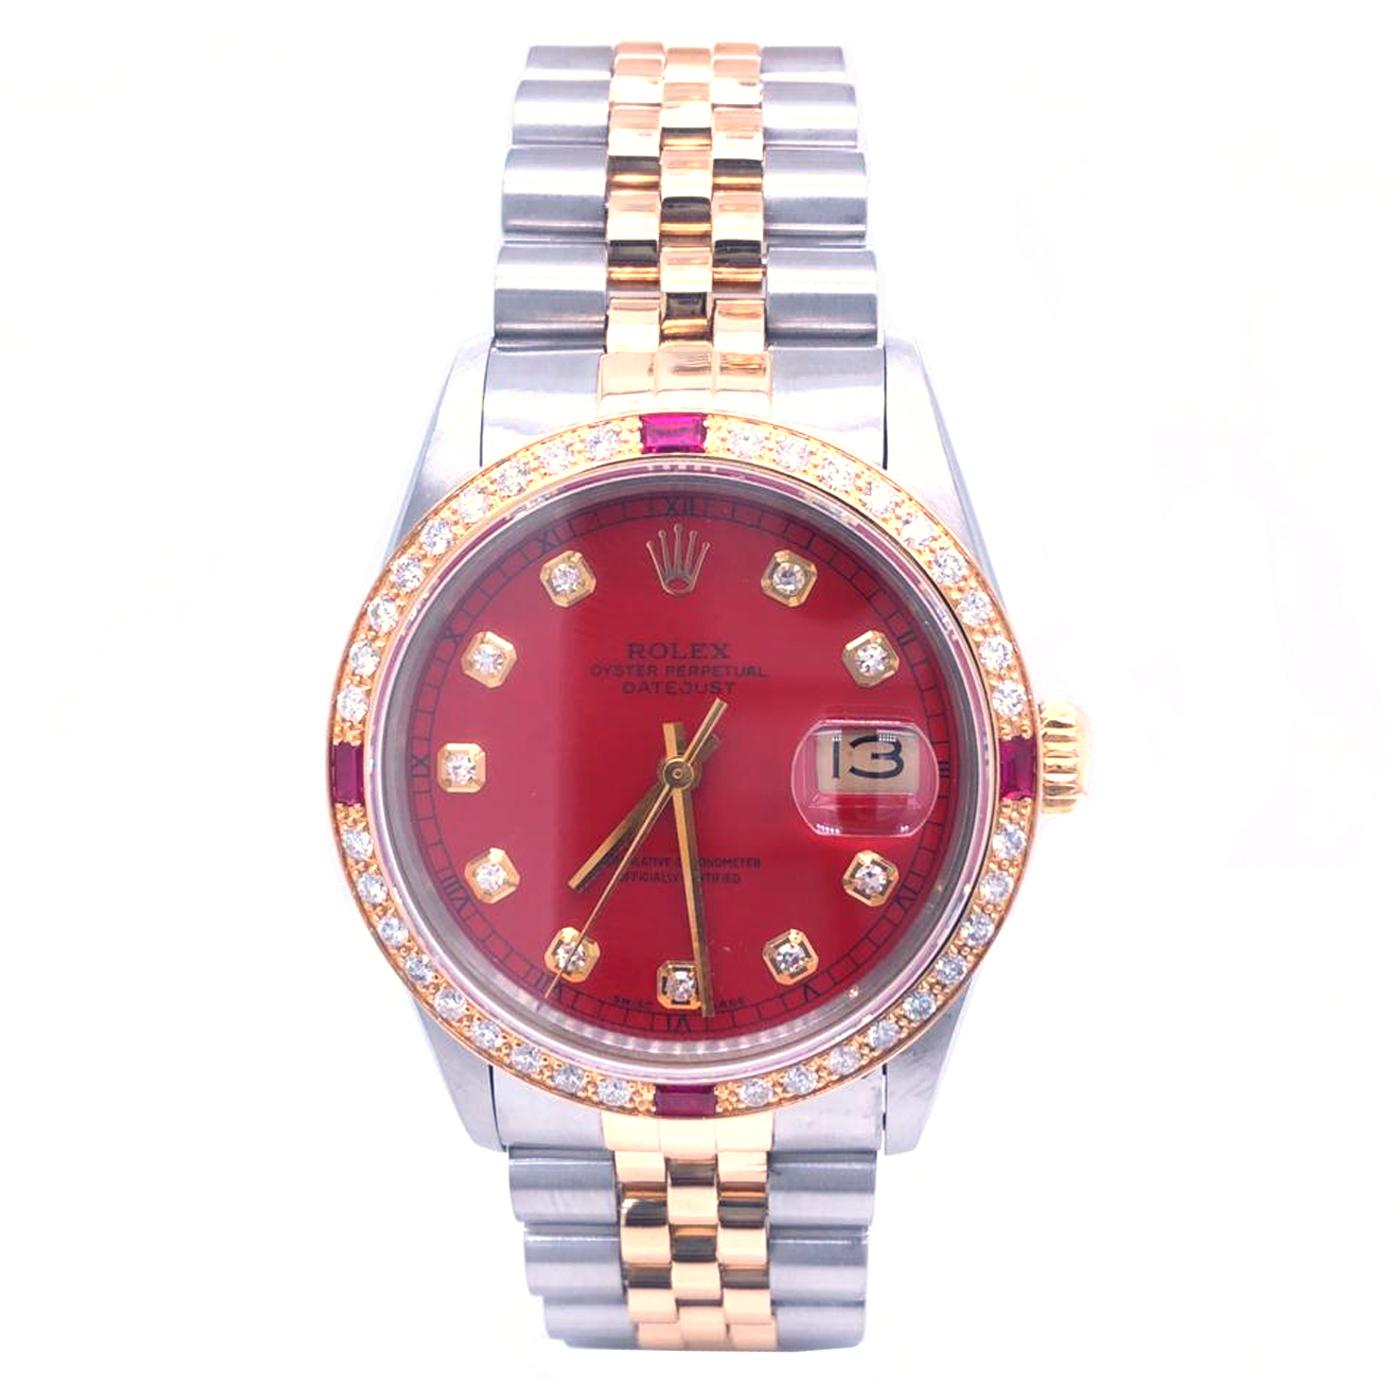 Stainless steel and 18k yellow gold 36mm Rolex Datejust watch featuring an automatic movement with a date complication, diamond and Ruby bezel, diamond hour marks, Cyclops lens, and Jubilee bracelet with deployant clasp.

Specification:
Brand: